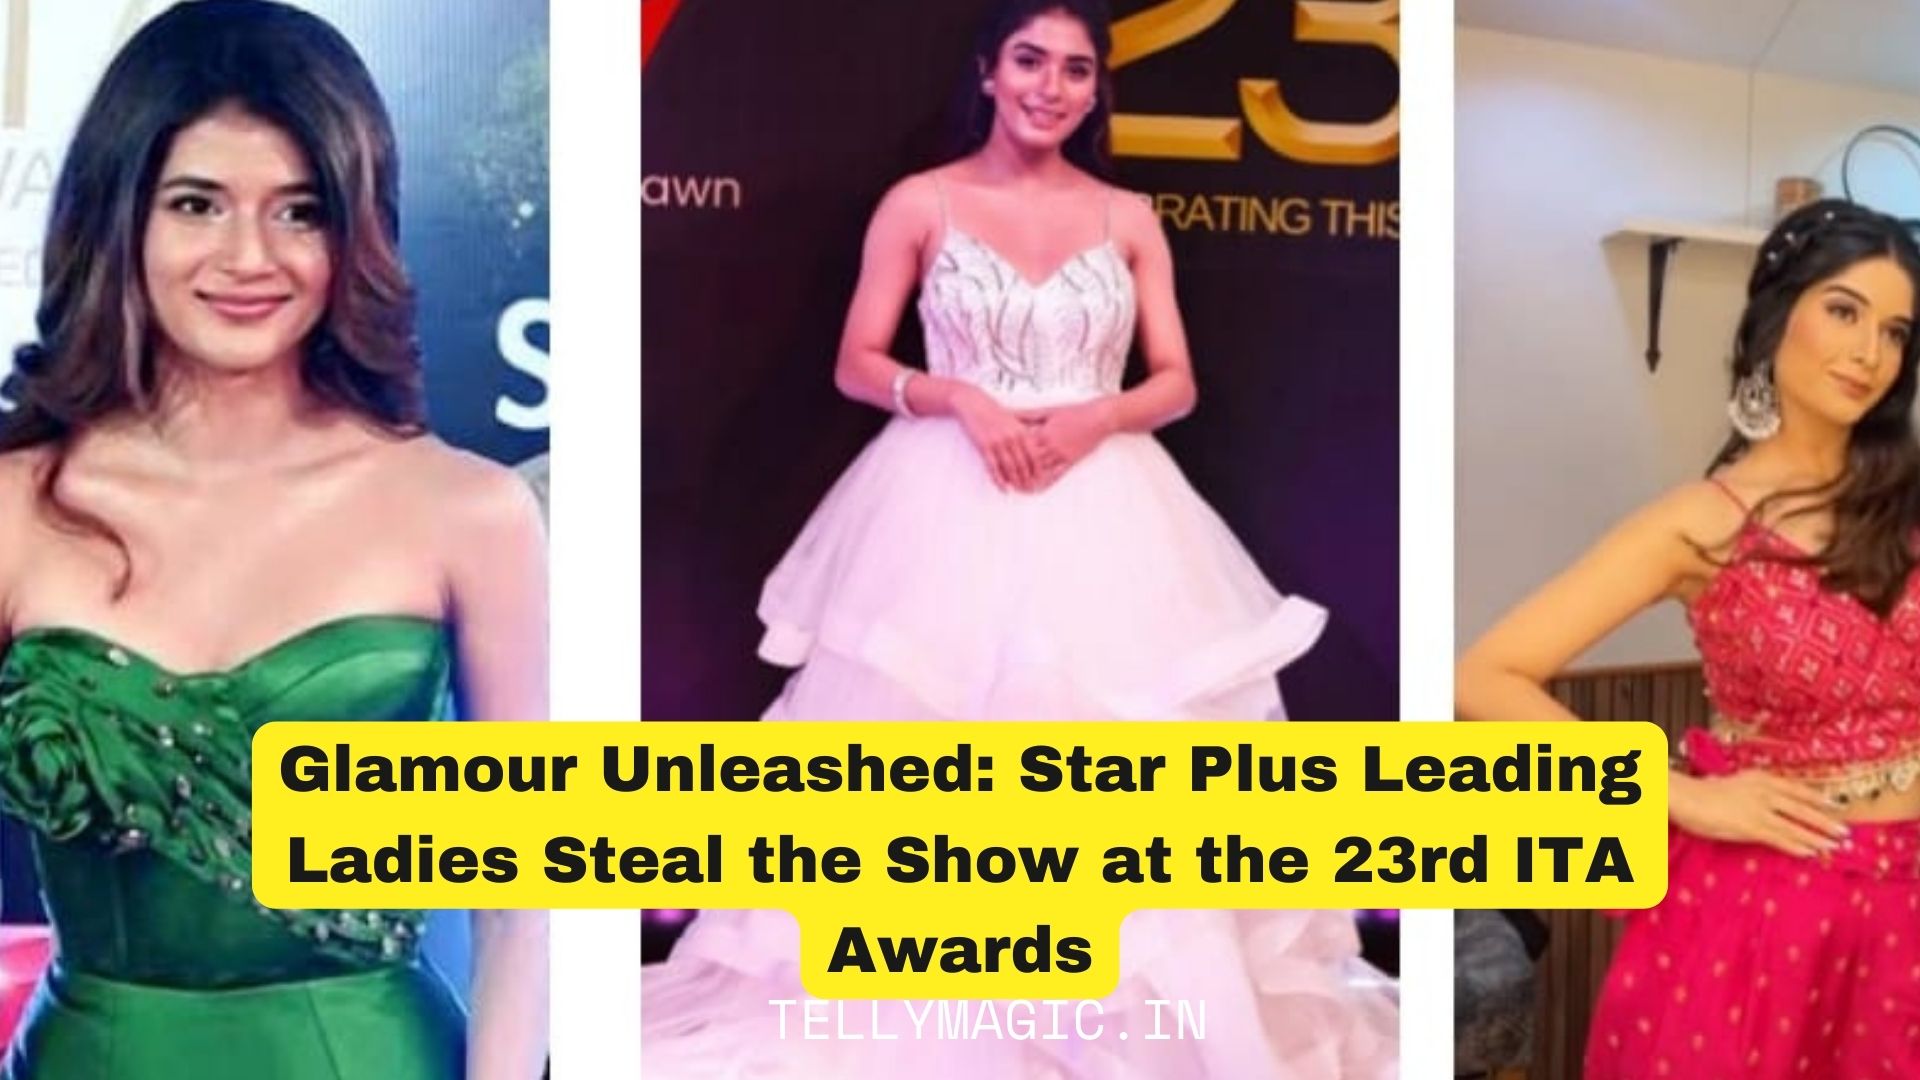 Glamour Unleashed: Star Plus Leading Ladies Steal the Show at the 23rd ITA Awards